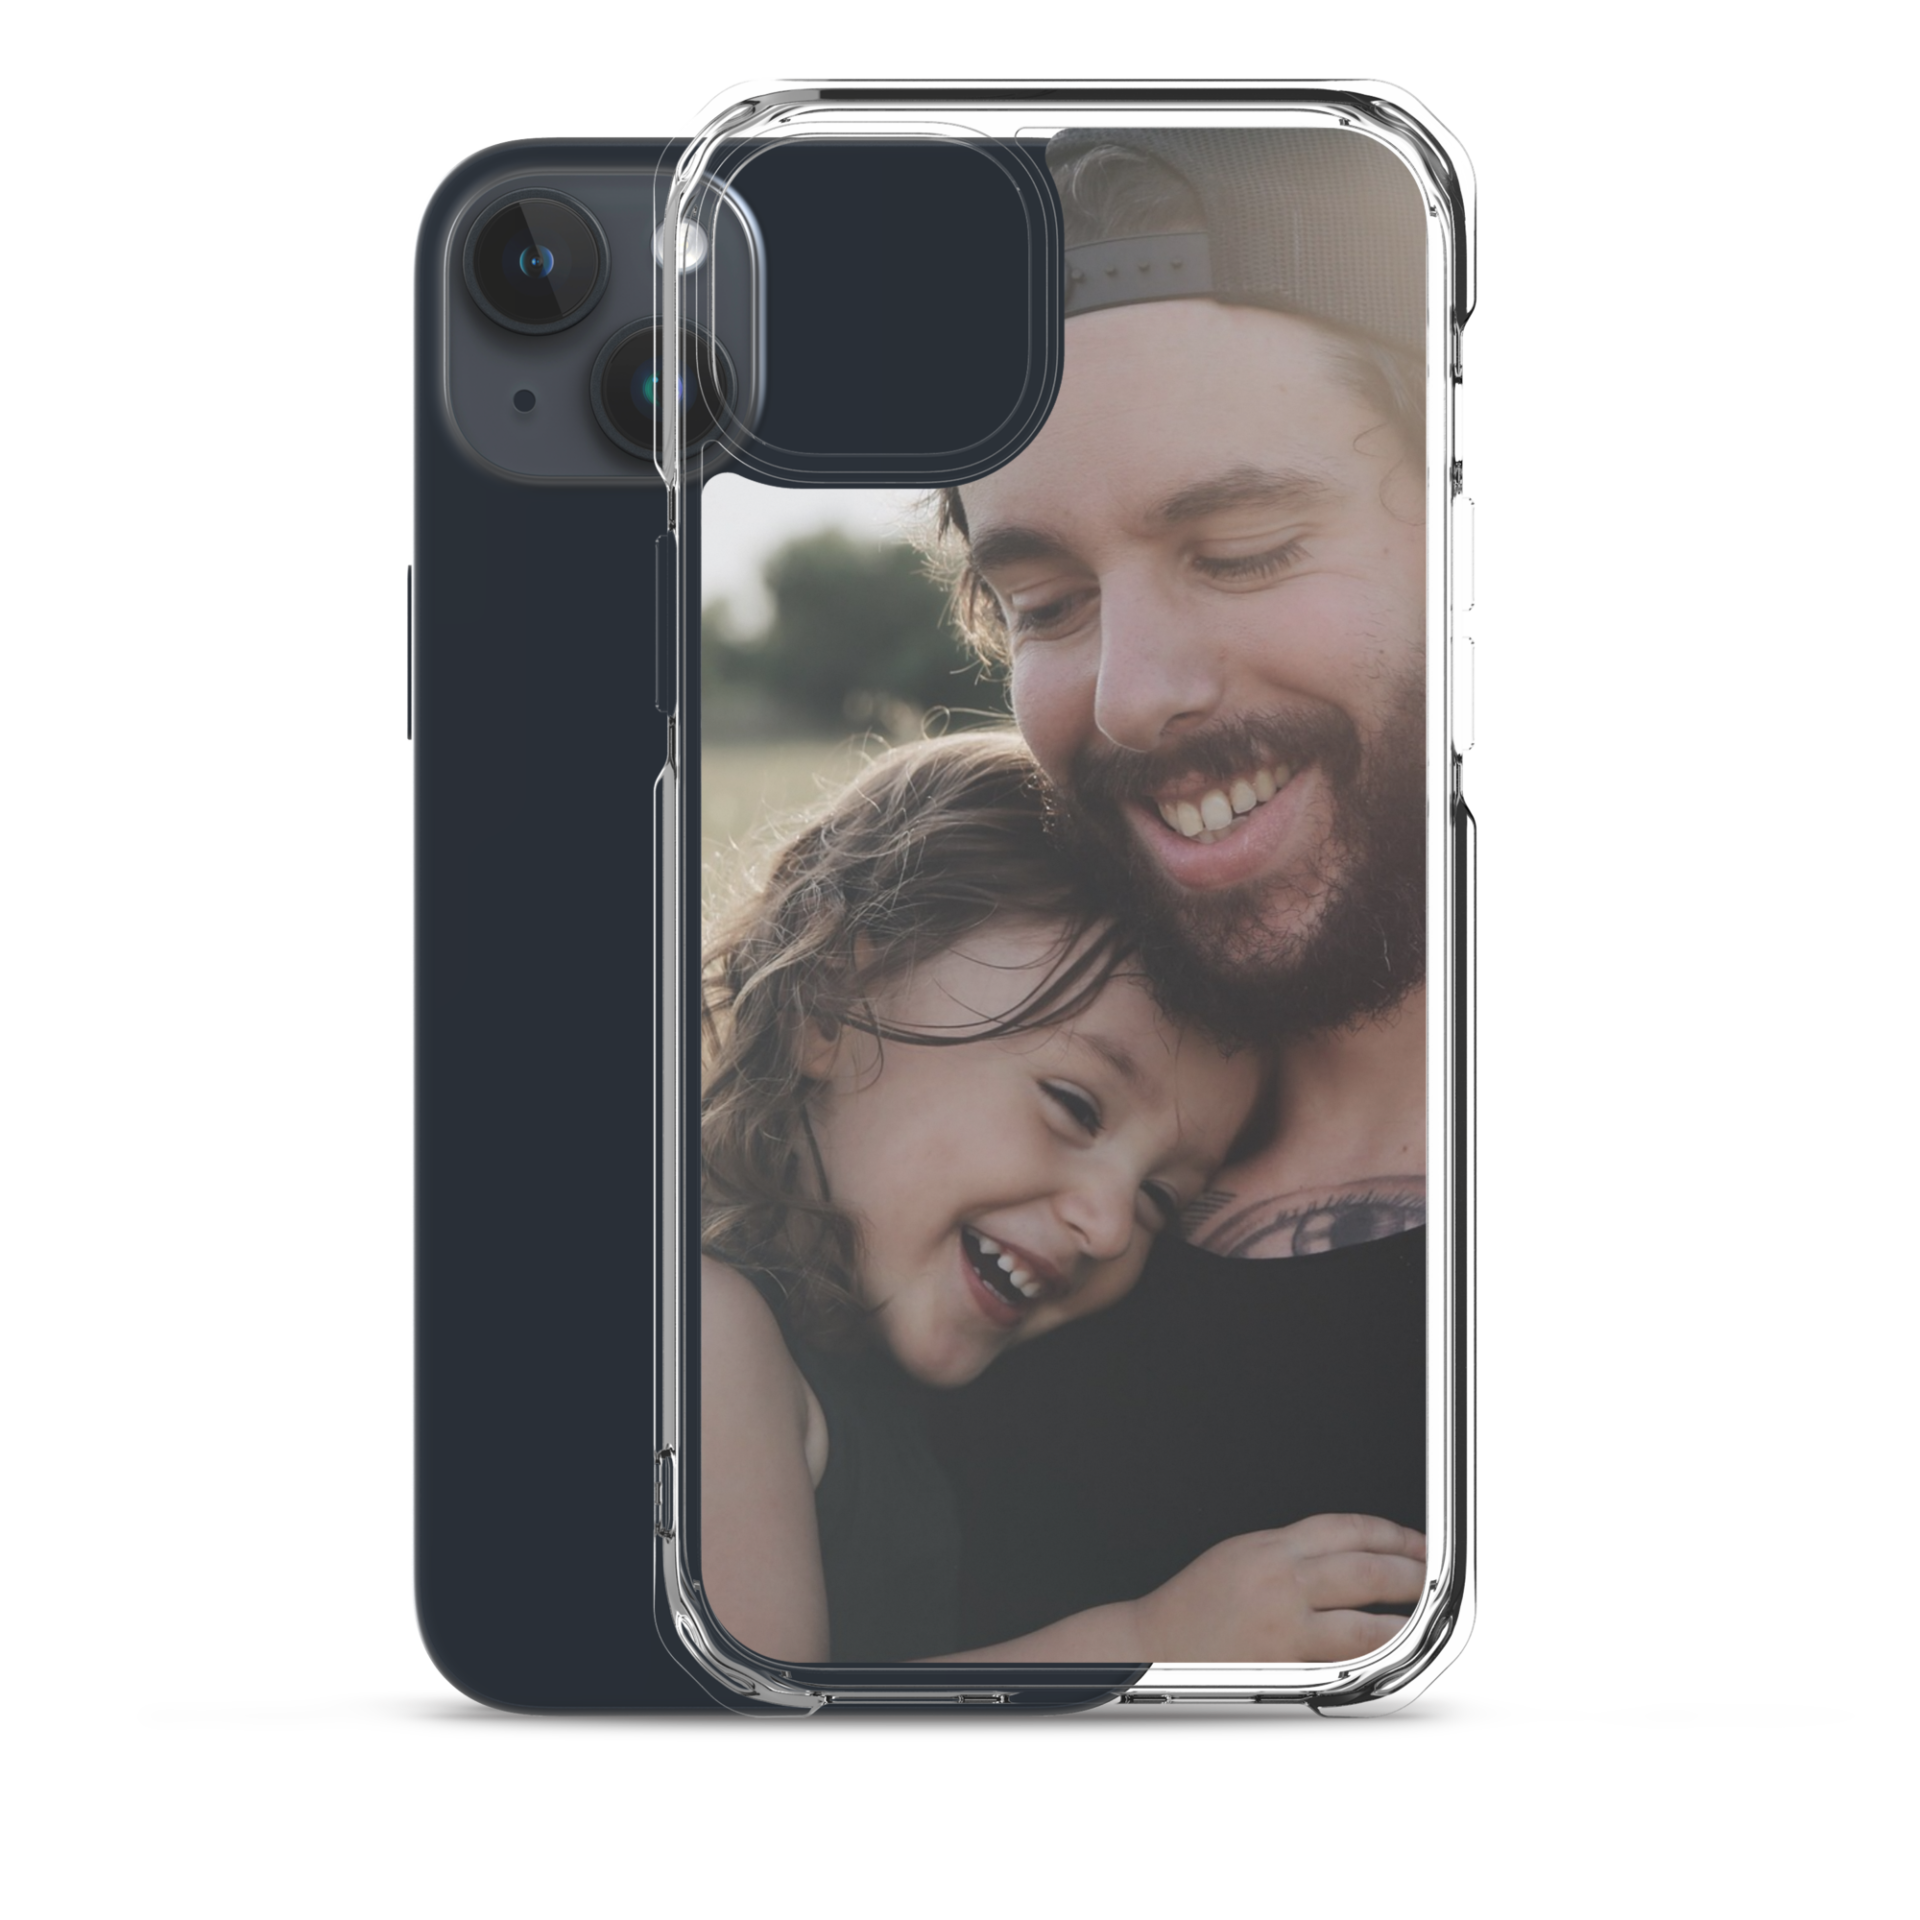 EyeXcite's Sketch & Toon Phone Cases. Transform your photos into bespoke sketches or cartoons, encapsulating your cherished memories or beloved pets on a case that travels with you everywhere.